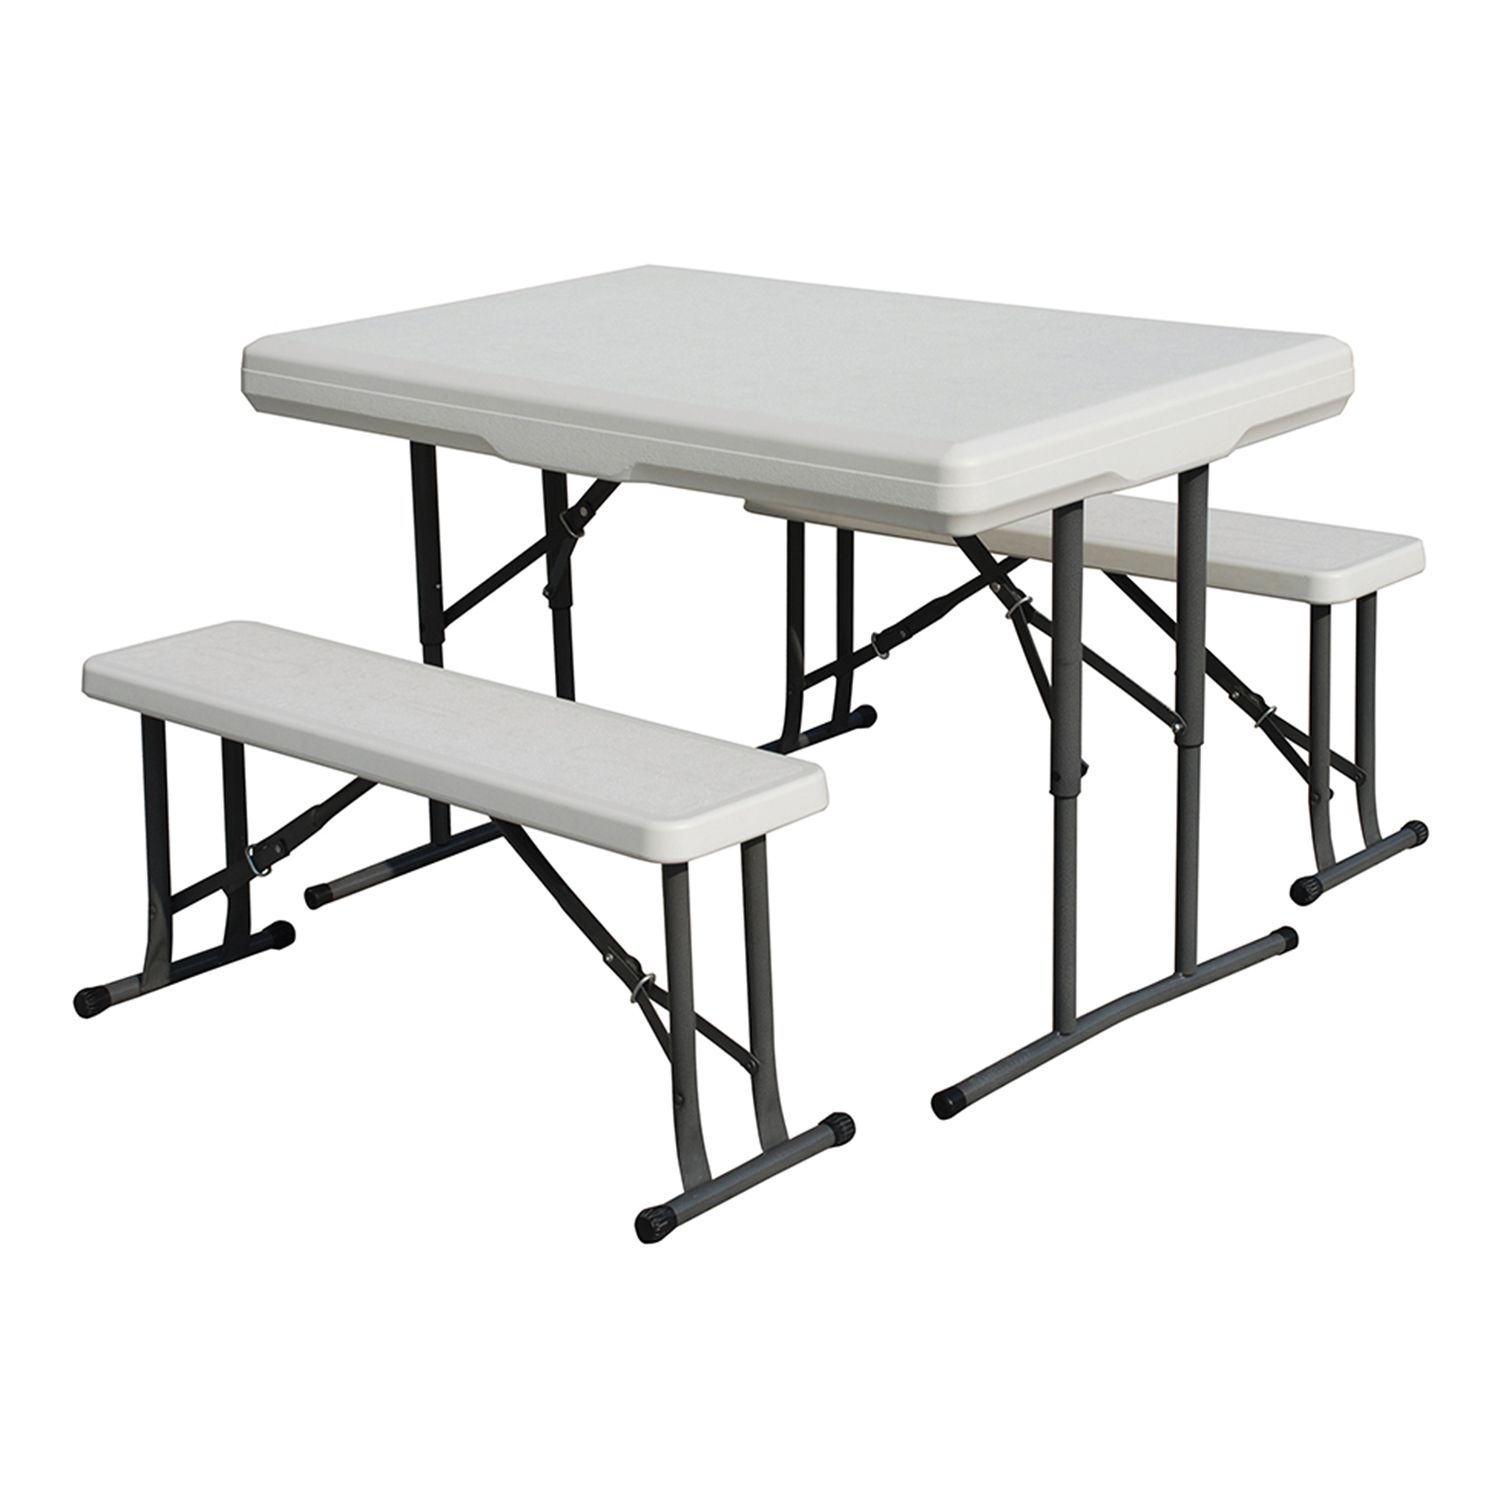 Stansport Folding Table with Bench Seats